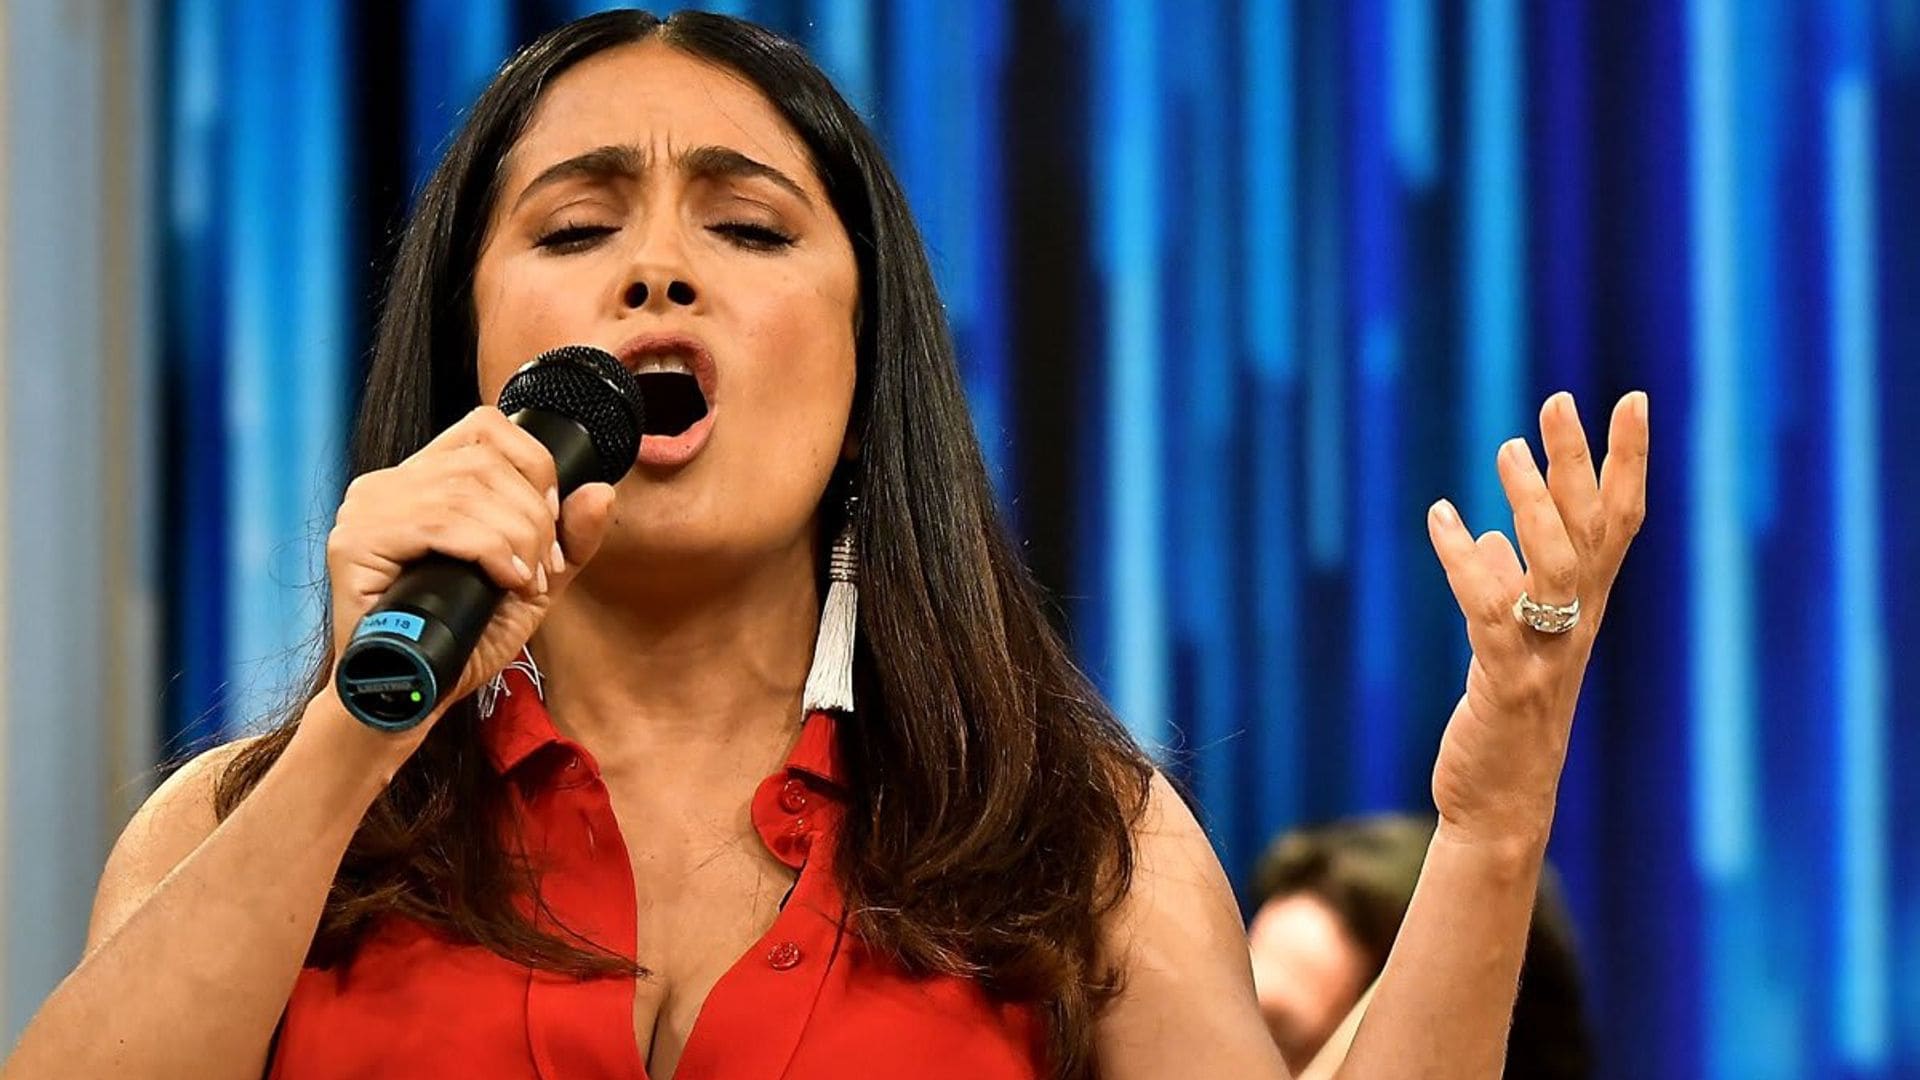 Salma Hayek sings ‘I Will Survive’ on beach to ring in 2021 and it’s everything